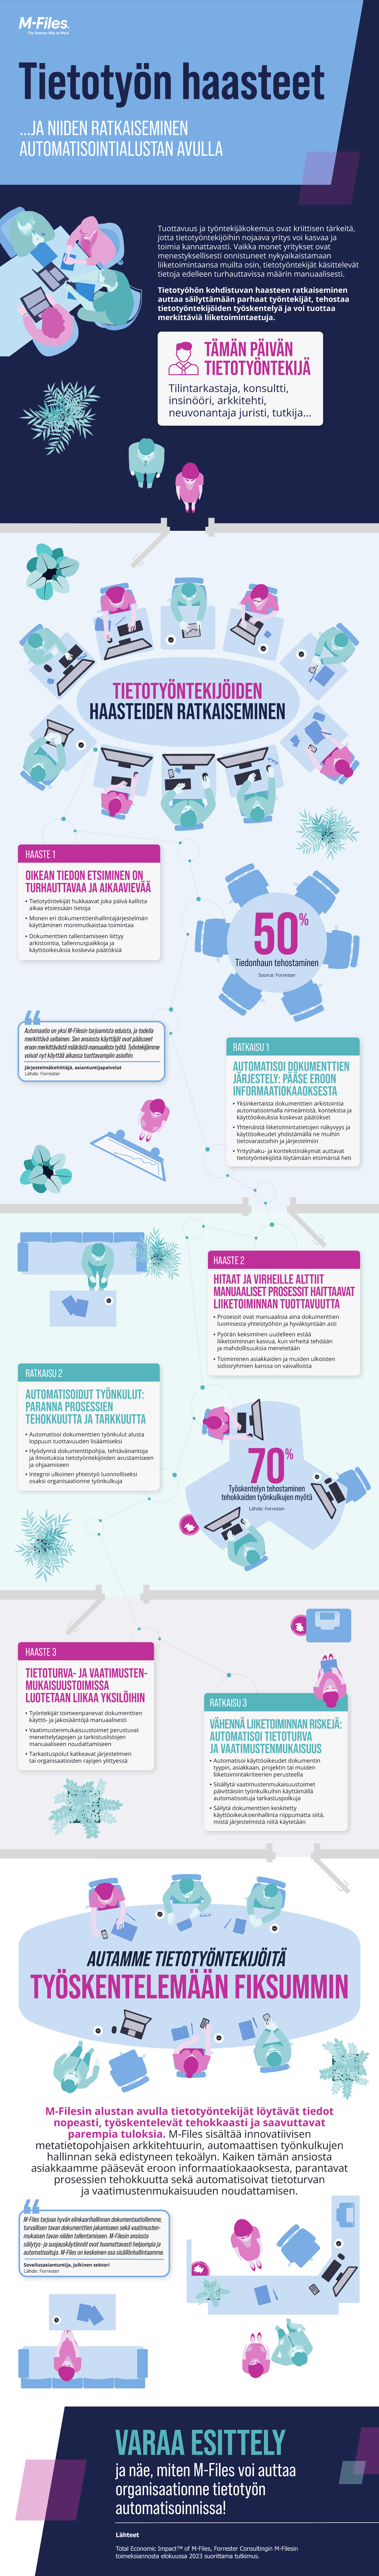 Infographic - Knowledge Work Automation - FI (ID 438477)